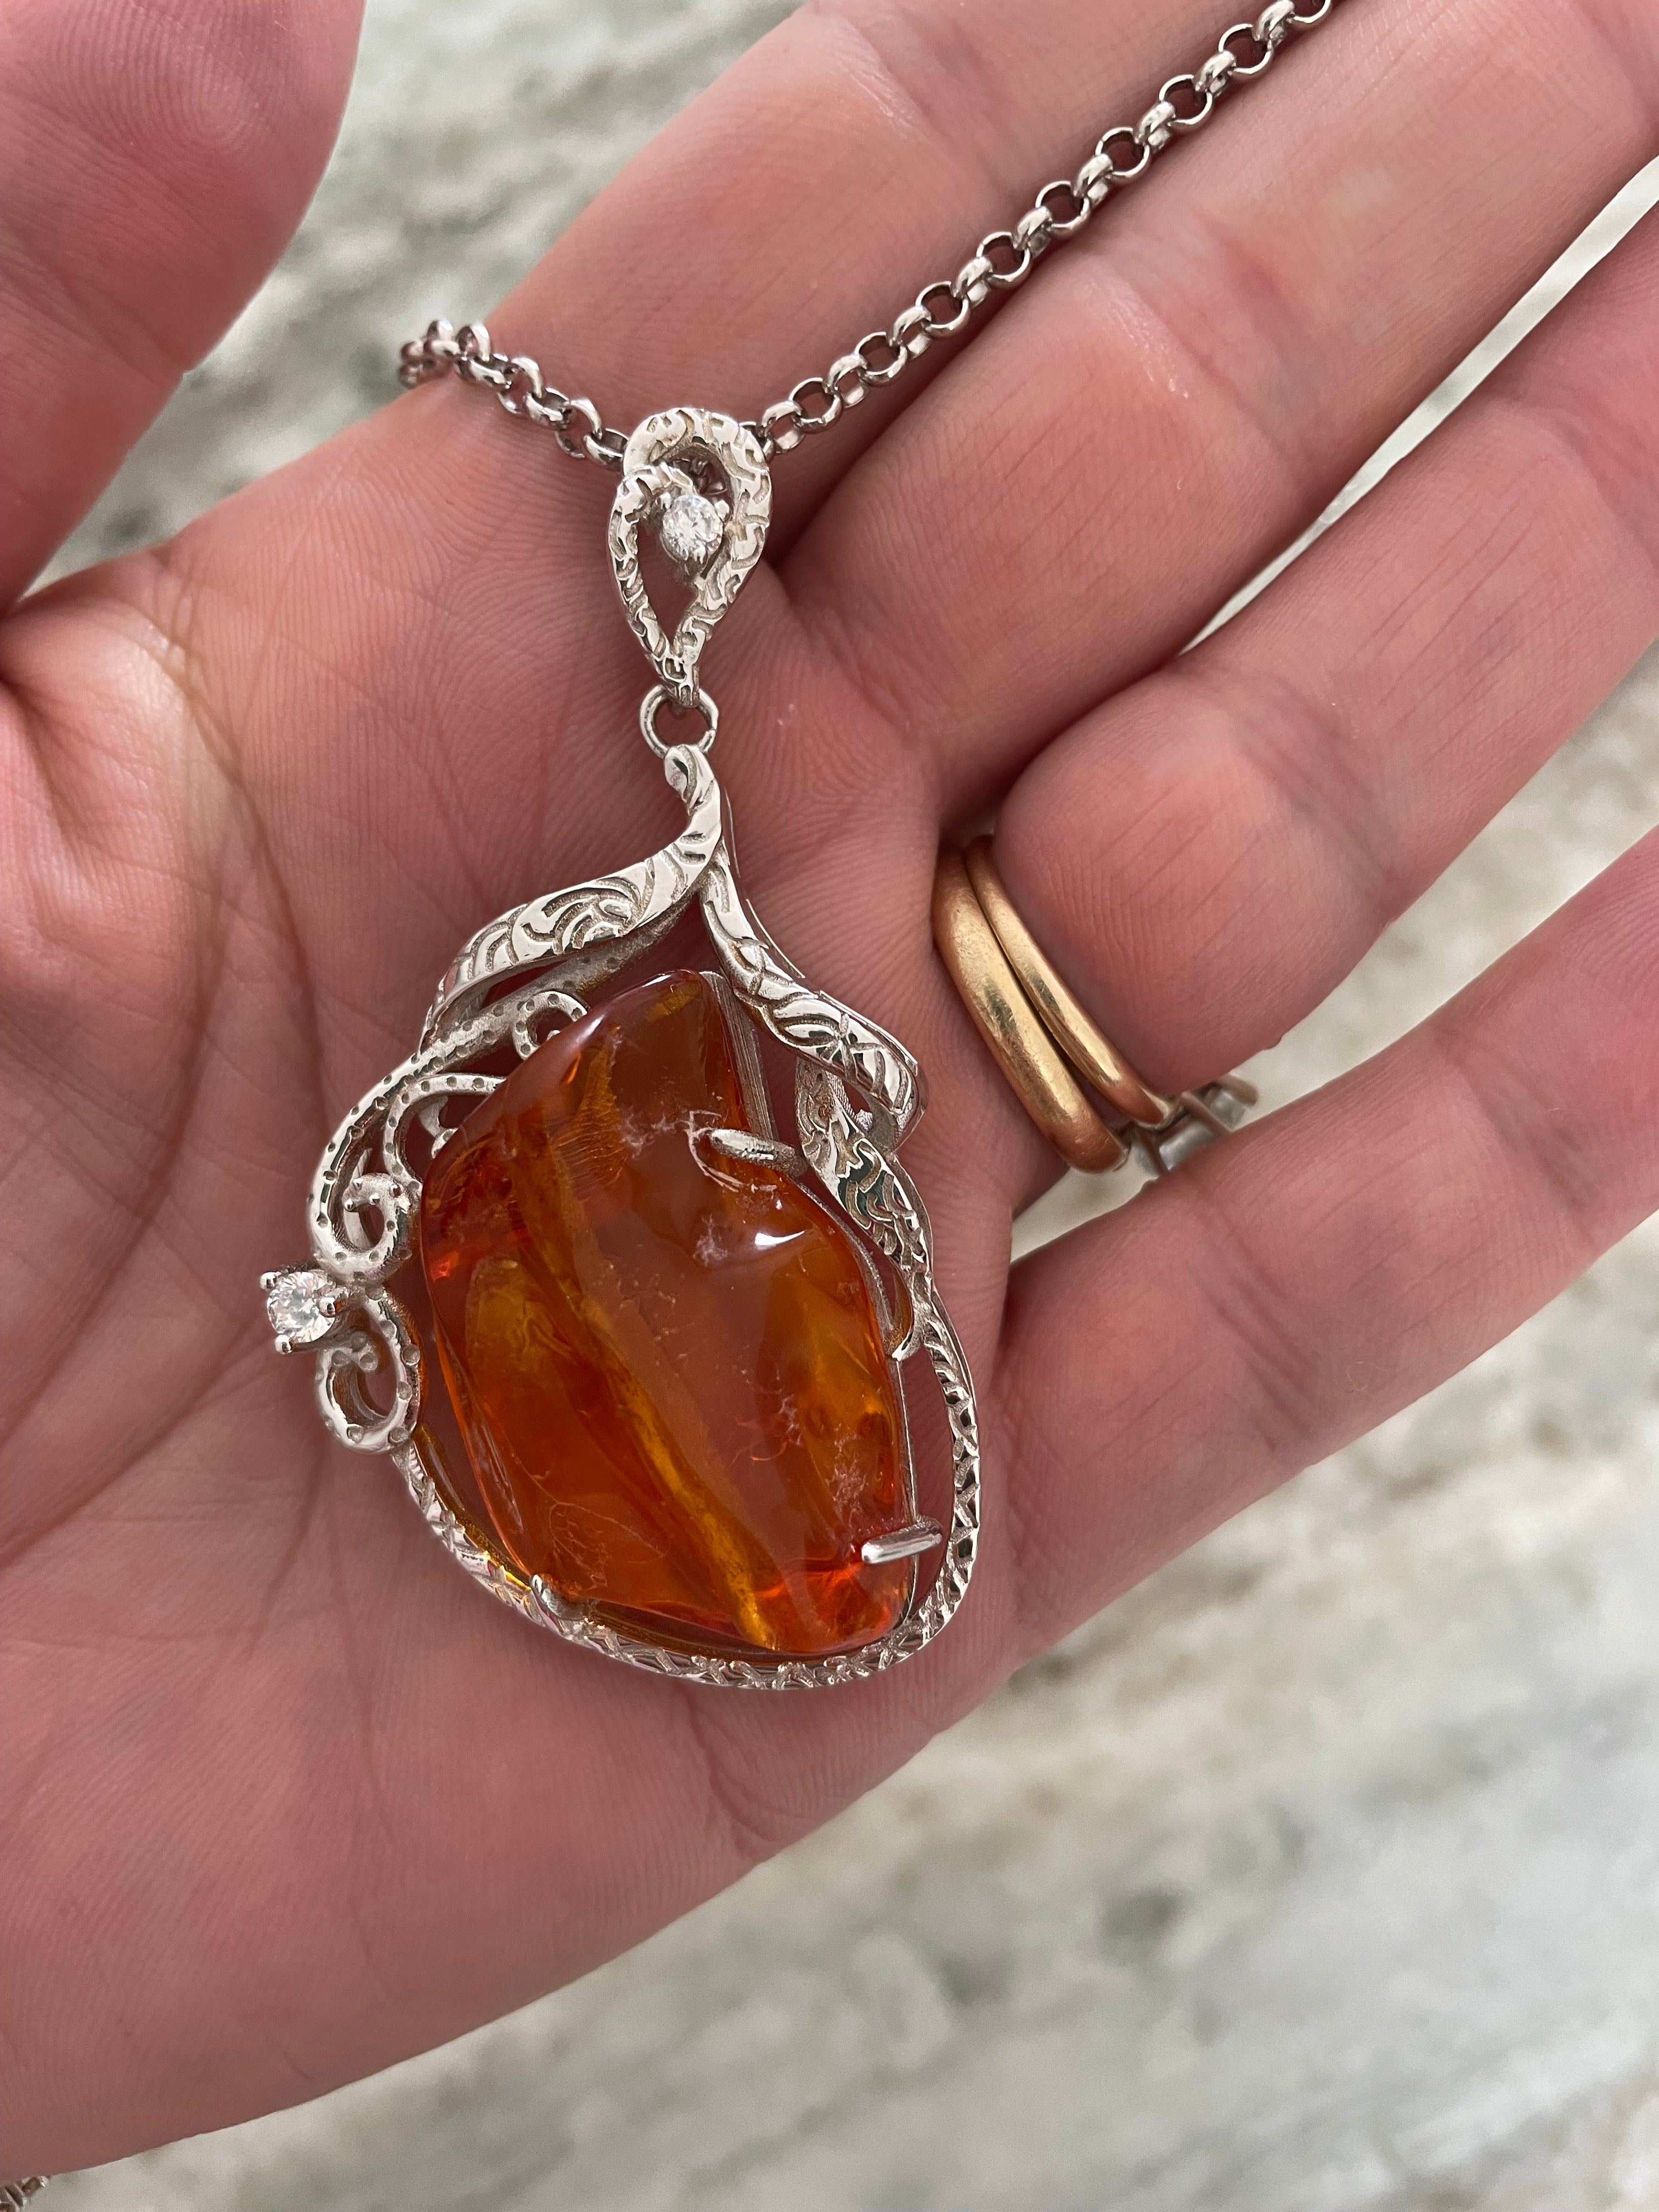 Jewellery - Necklaces & Pendants - Pendant Necklaces - Amber Extraordinaire  Sterling Silver Freeform Amber Pendant with Chain - Online Shopping for  Canadians